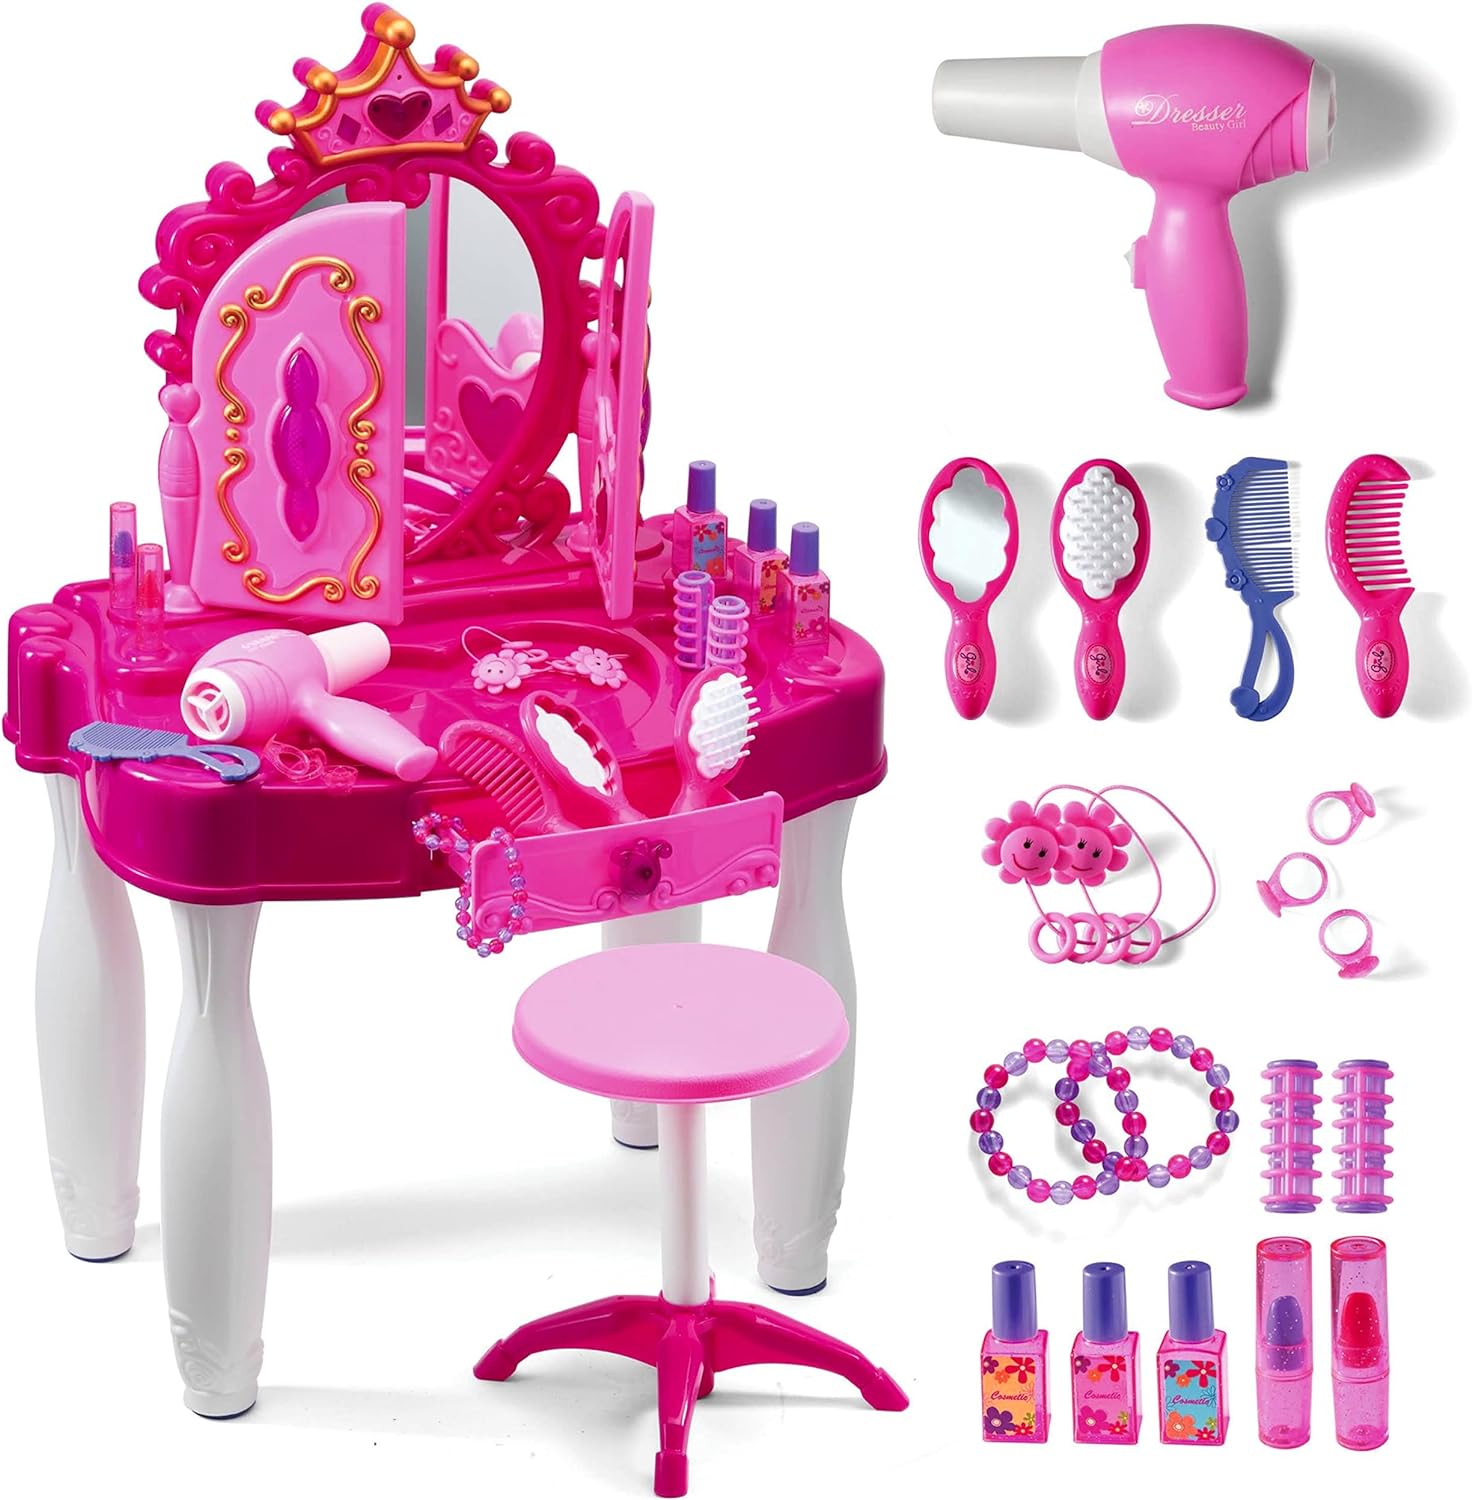 Play22 Pretend Play Girls Vanity Set with Mirror and Stool 21 PCS - Kids Makeup Vanity Table Set with Lights and Sounds - Kids Beauty Salon Set Includes Fashion Hair & Makeup Accessories & Blowdryer